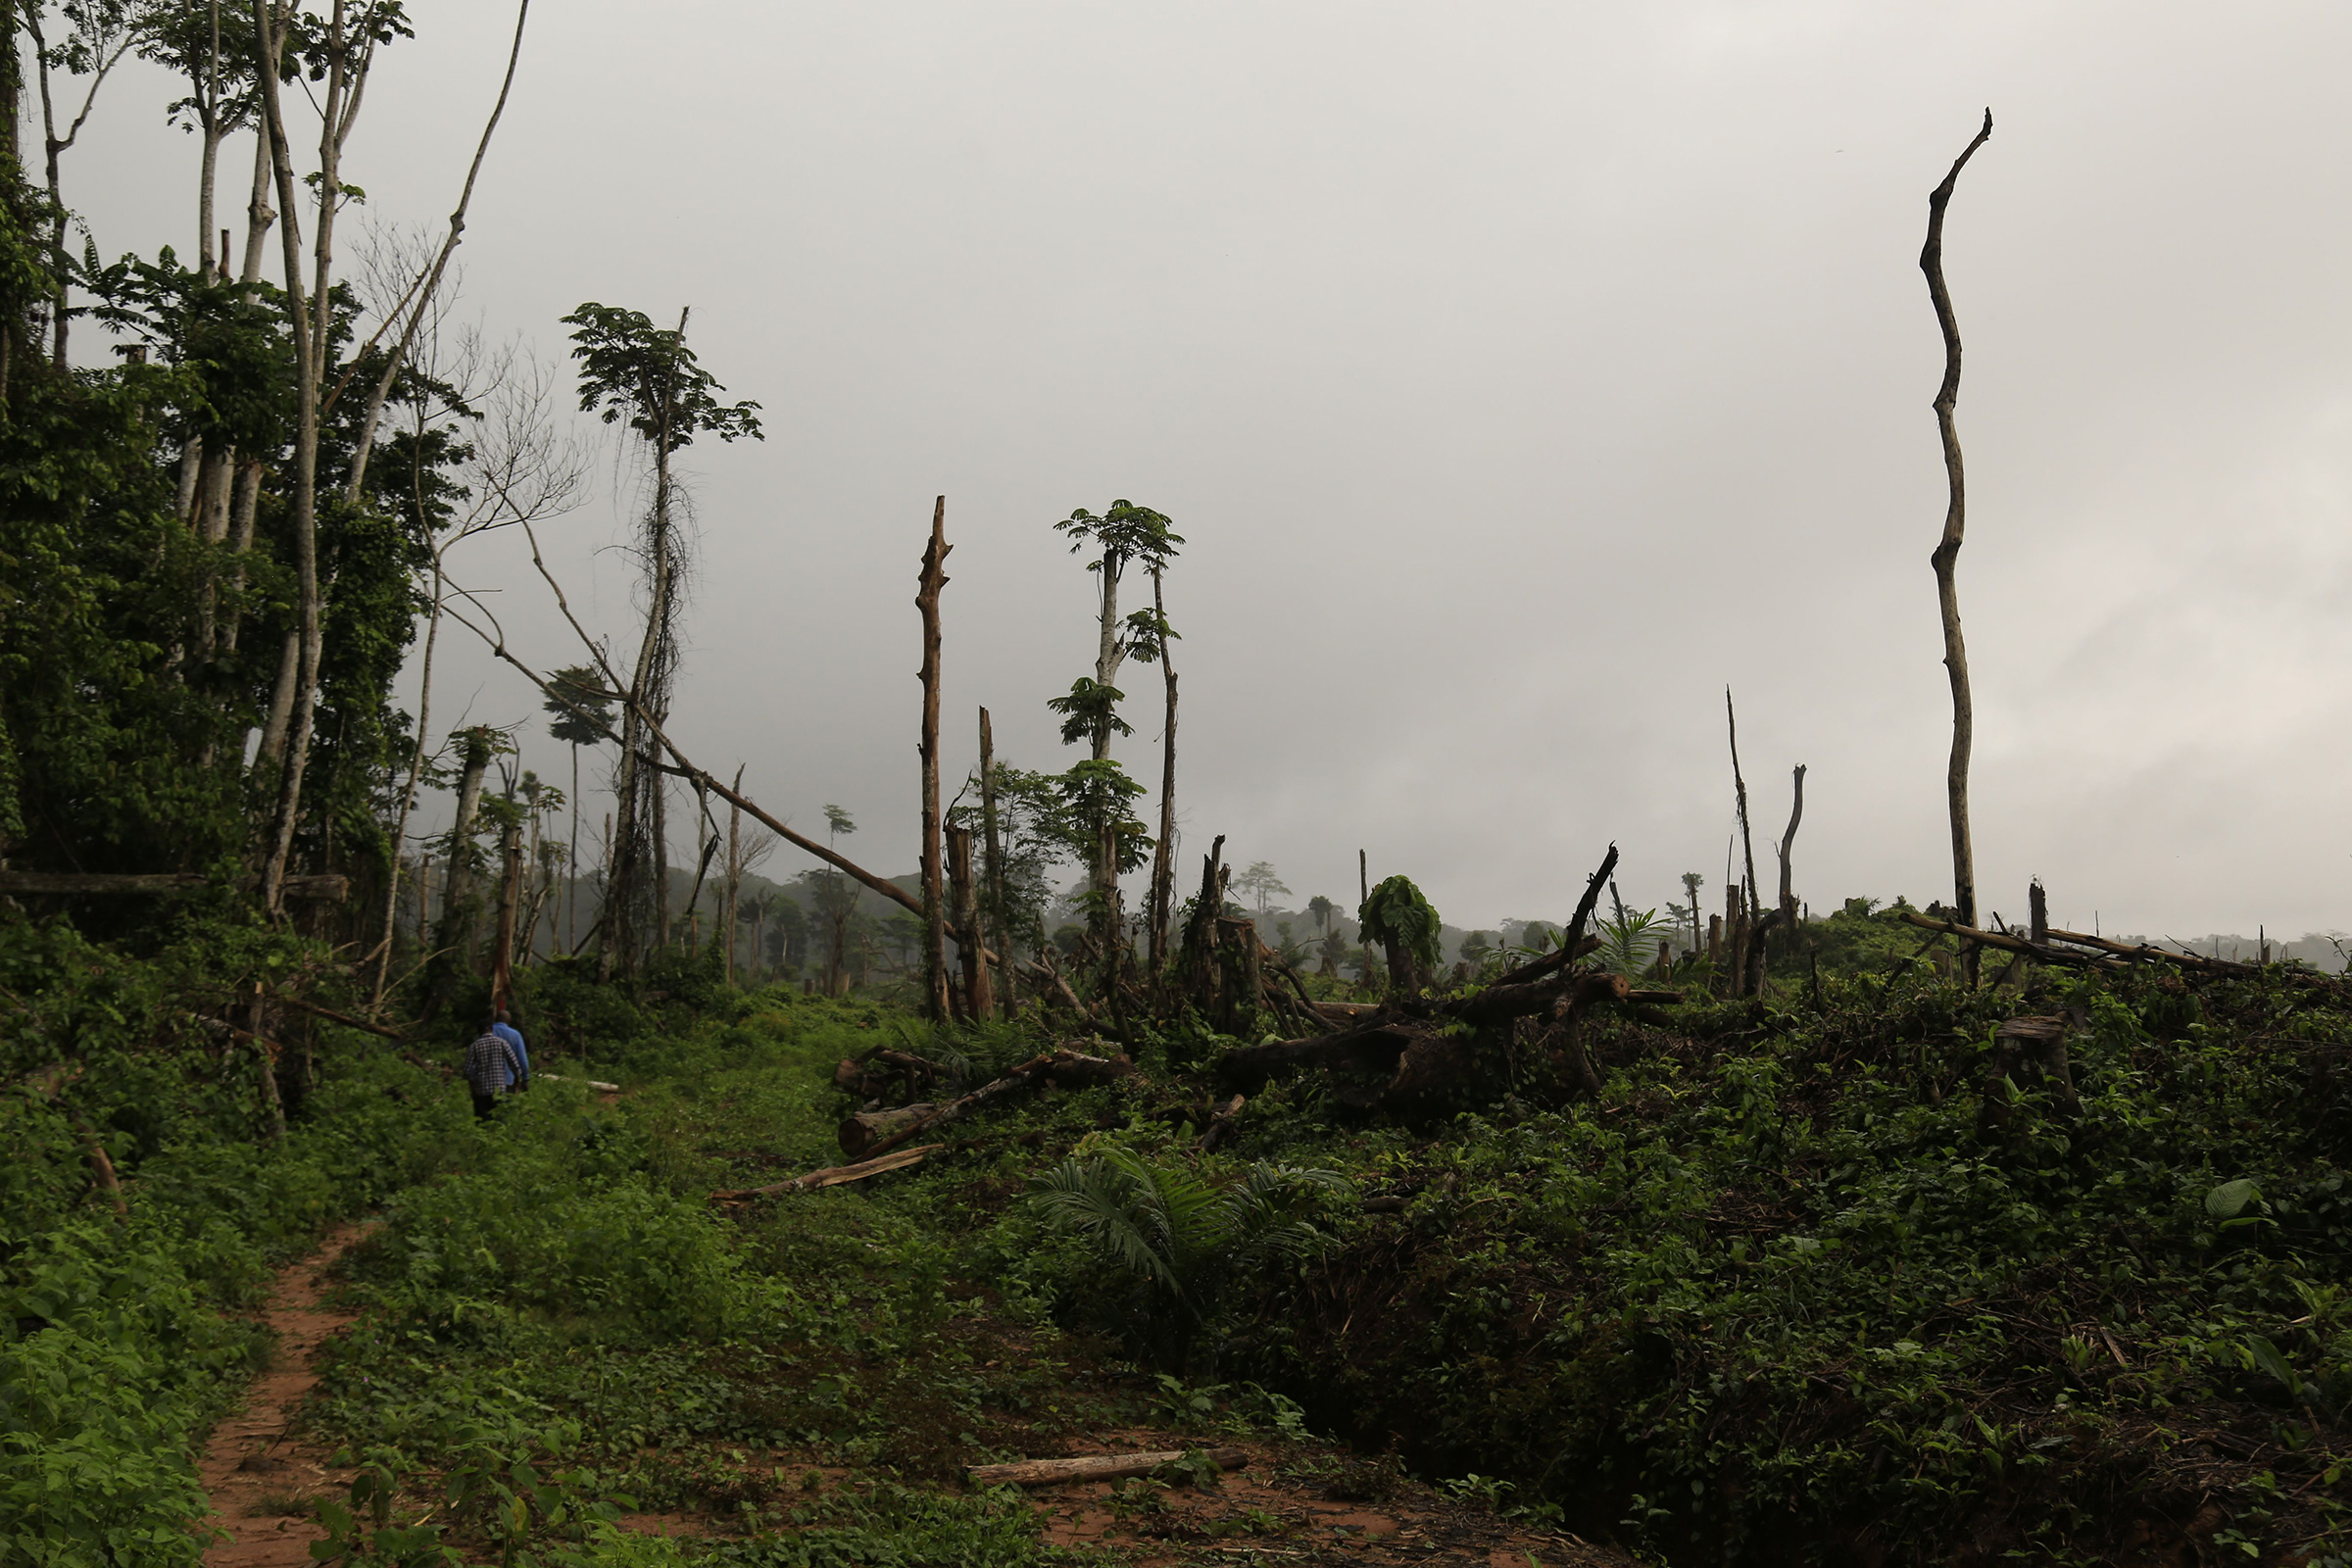 Tree stumps are seen after 850 hectares of forests were felled to plant oil palms in the Congo Basin rain forest in Democratic Republic of Congo, Sept. 25, 2019. (Samir Tounsi—AFP/Getty Images)